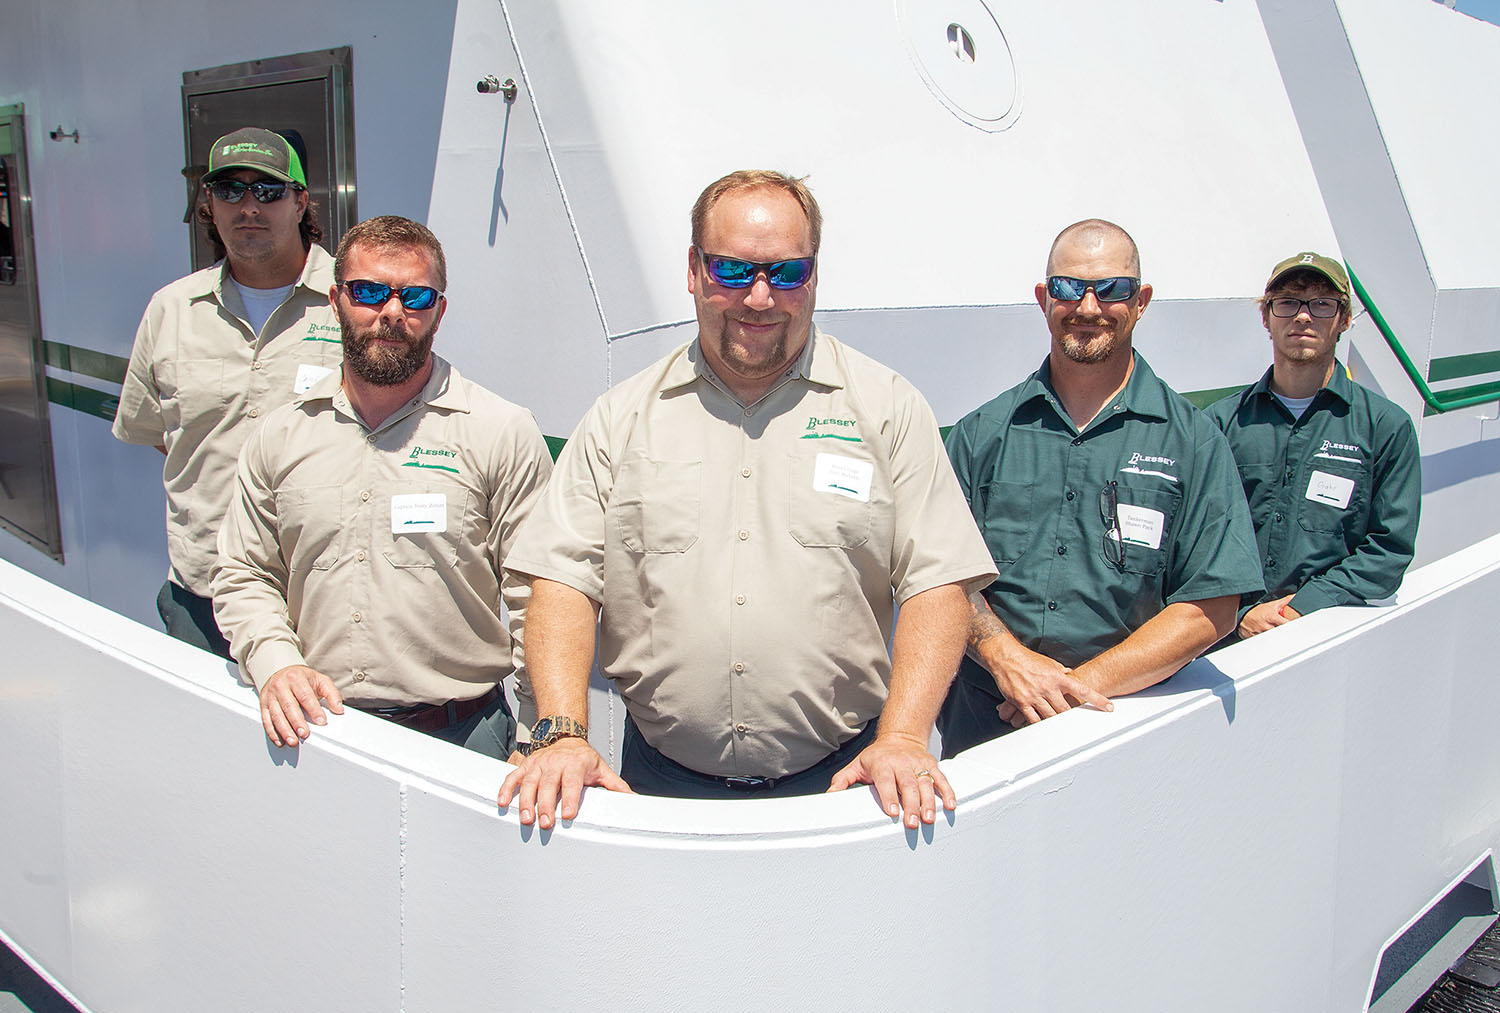 Crew of the Walter E. Blessey, Jr., from left: deckhand Caleb Richburg, Capt. Terry Zirlott, relief Capt. Eric Rabren, tankerman Shawn Pack and deckhand Gabe Brasseaux. (Photo by Frank McCormack)